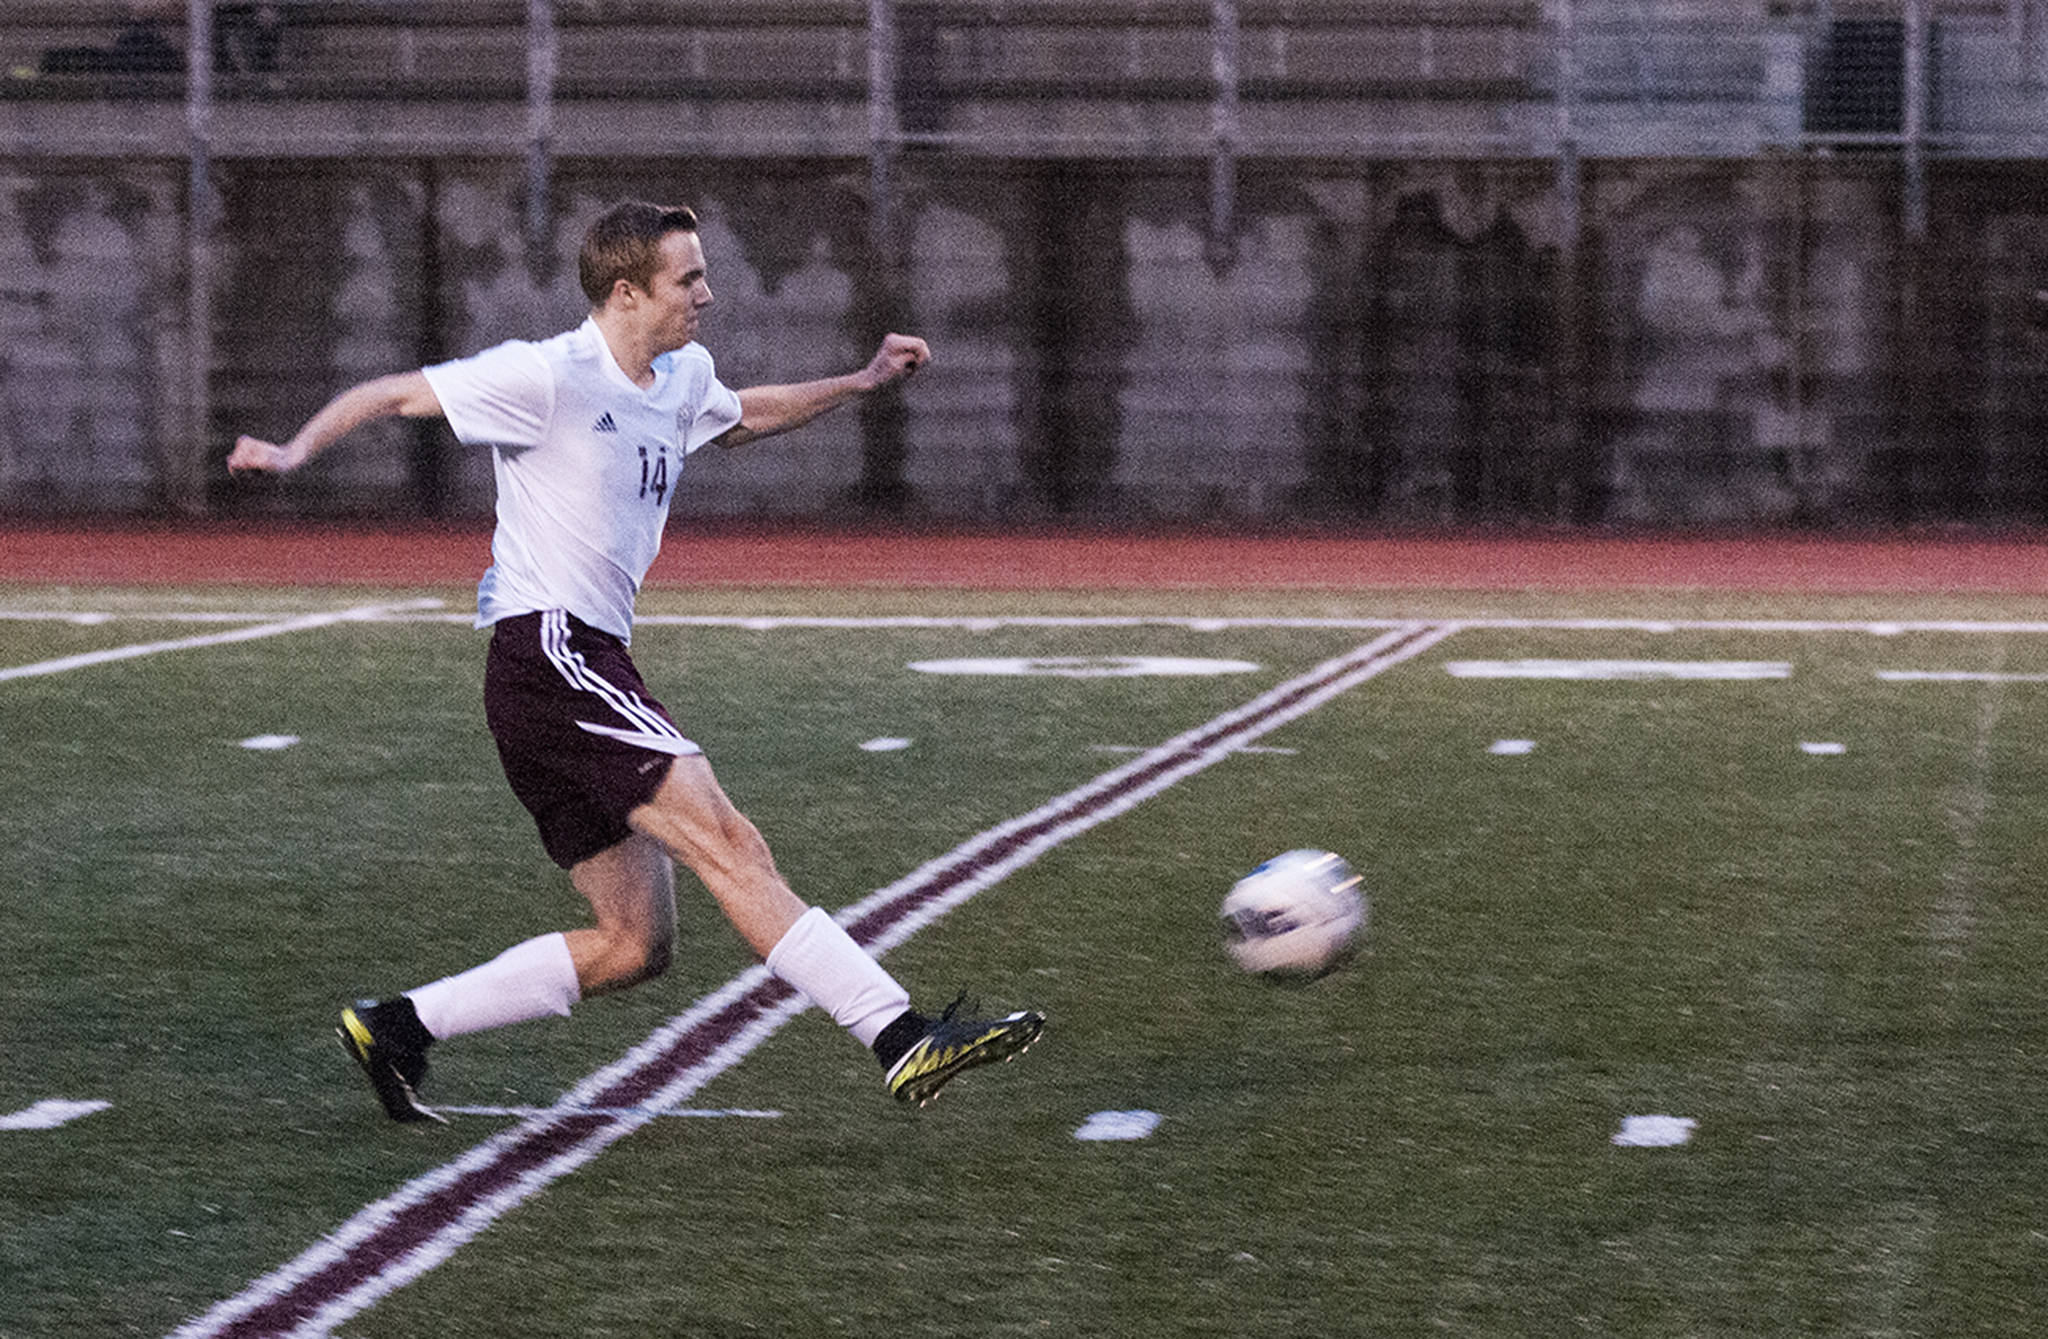 (Brendan Carl | The Daily World) Montesano’s Connor Parkinson fires a shot for the Bulldogs’ first goal against Centralia in a non-league match at Jack Rottle Field on Tuesday.